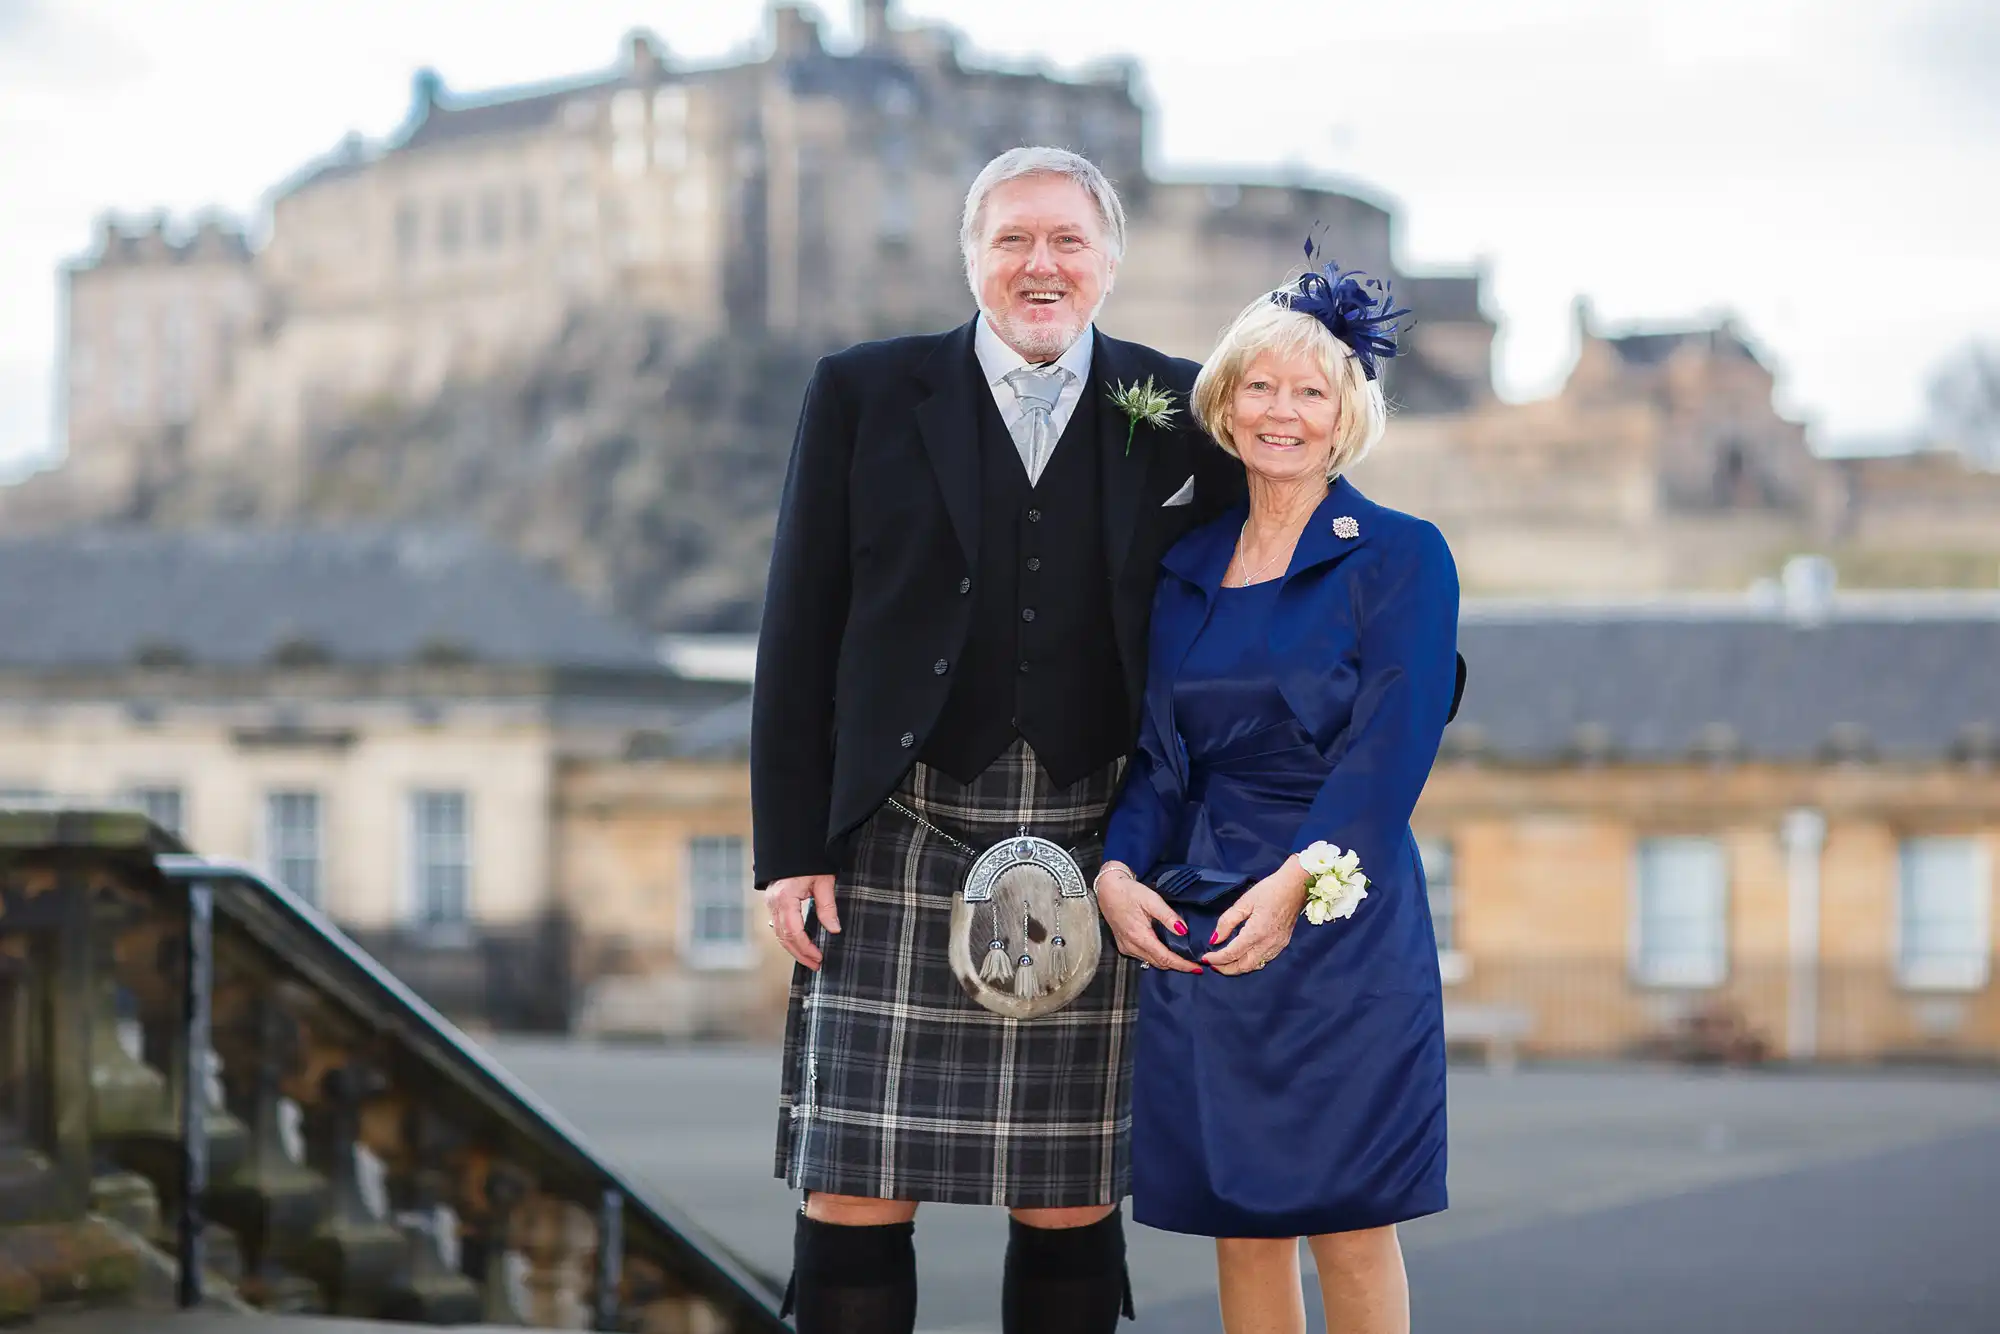 An elderly couple dressed in formal attire with the man in a kilt and the woman in a blue outfit, standing before edinburgh castle.